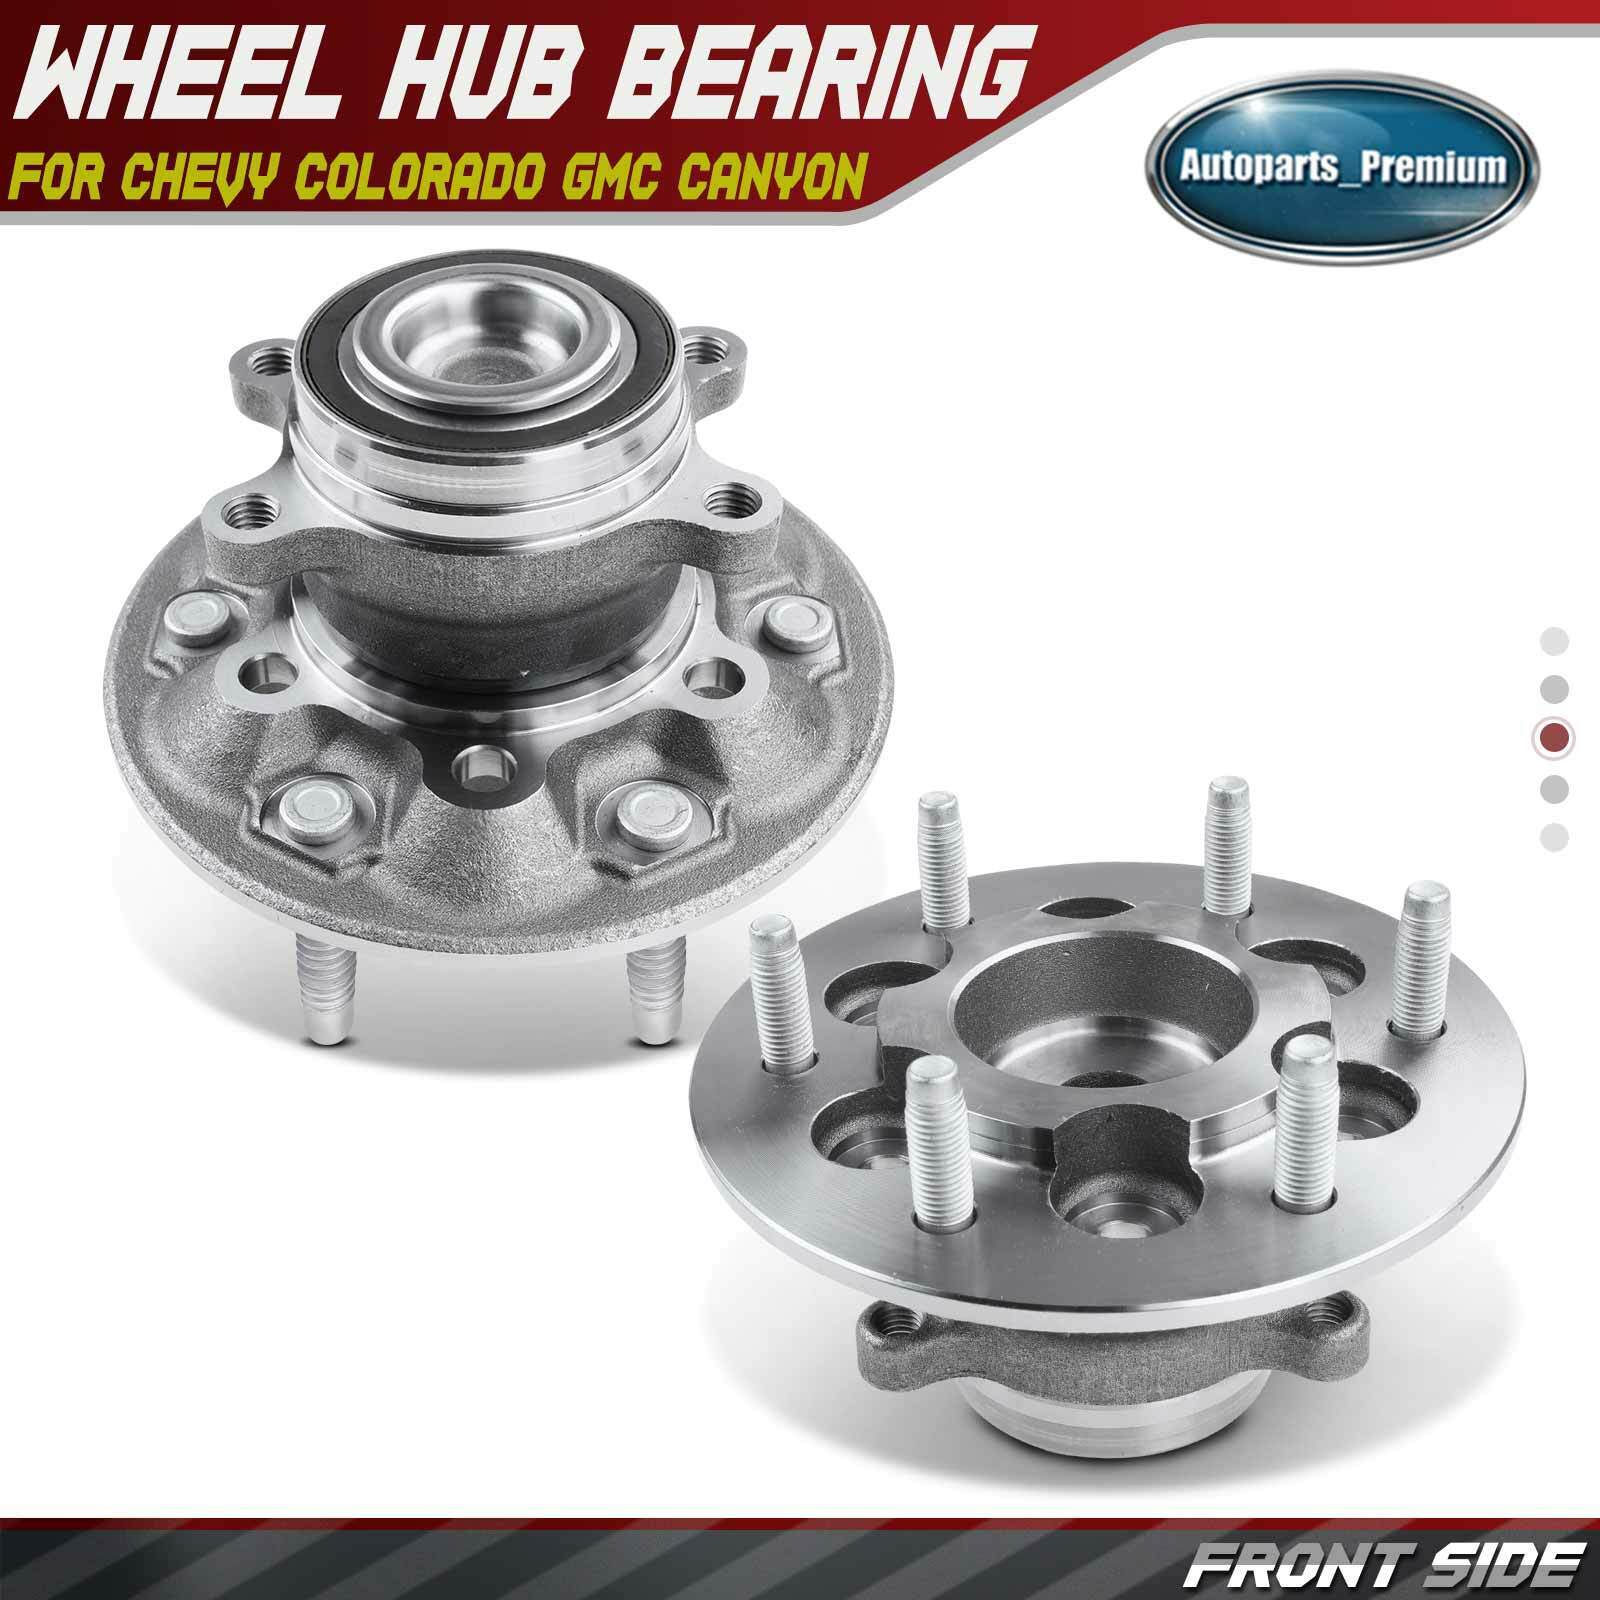 2x Front Sides Wheel Hub Bearing Assembly for Chevrolet Colorado GMC Canyon RWD